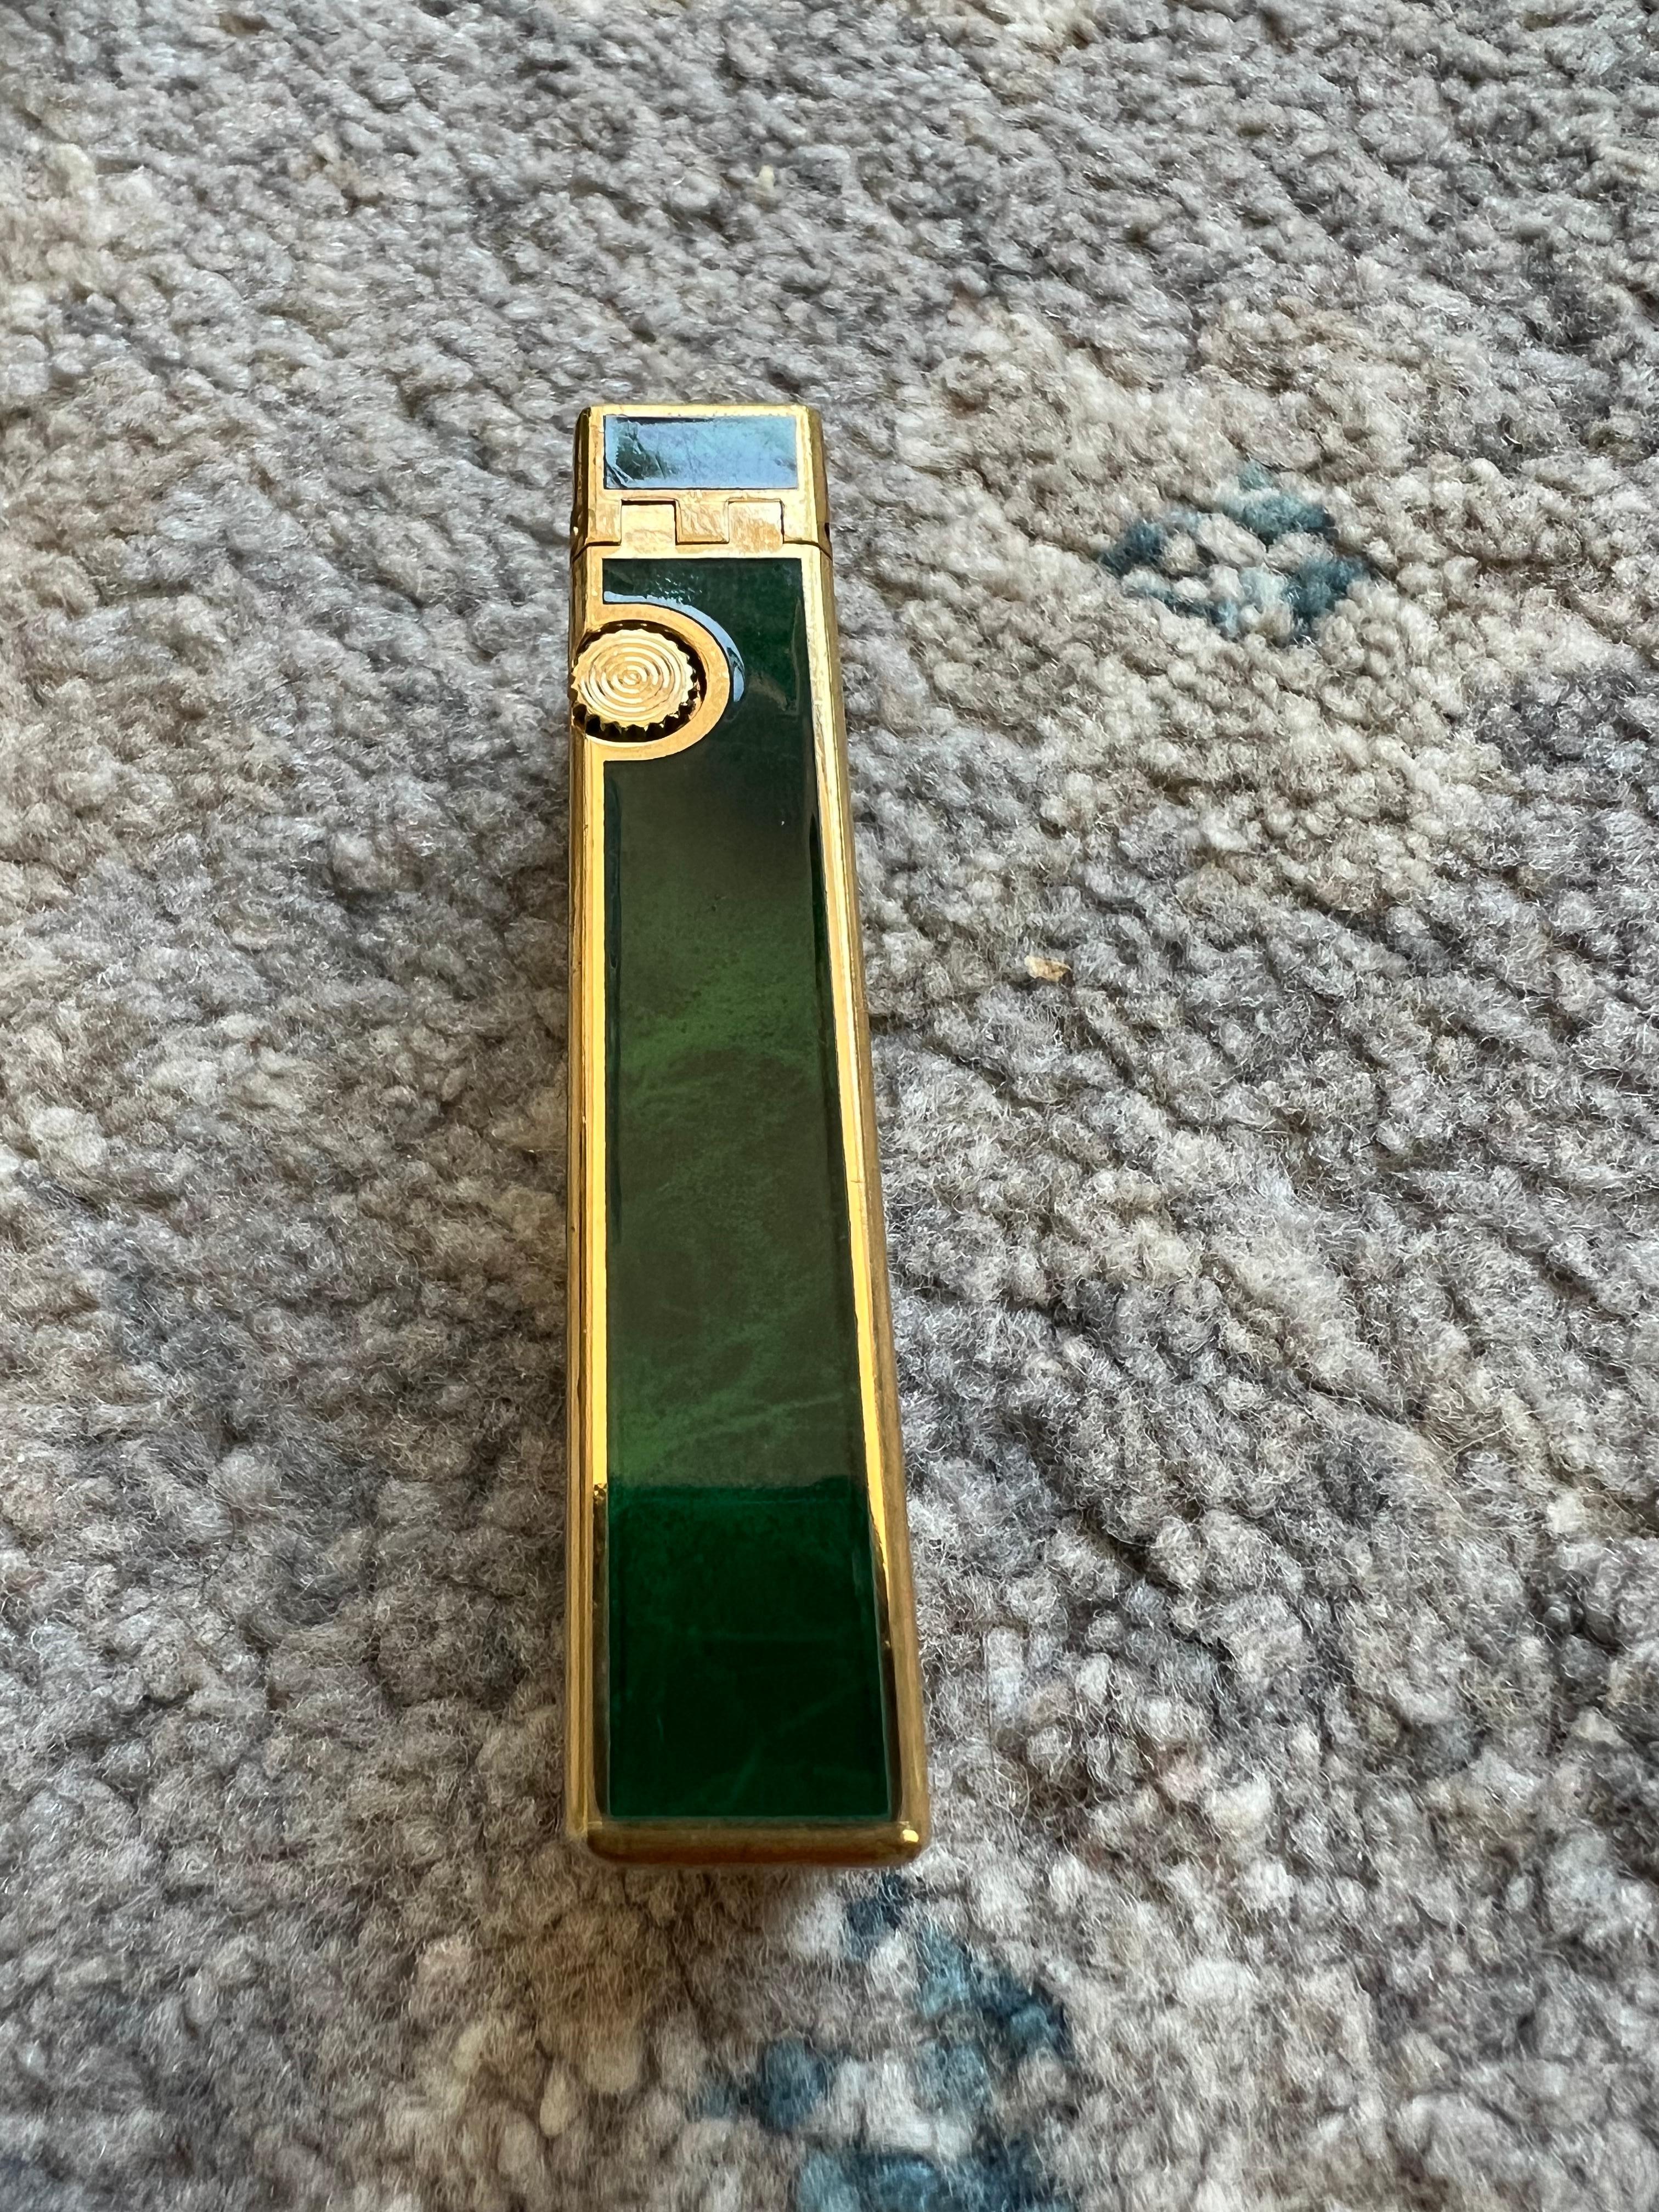 DUNHILL super rare GREEN MARBLE LACQUER & GOLD PLATED GAS ROLLER LIGHTER.
The lighter is mint condition. 
Comes with its original box and papers 
Circa 1980s
A rare collectable find. 
Perfect gift. 